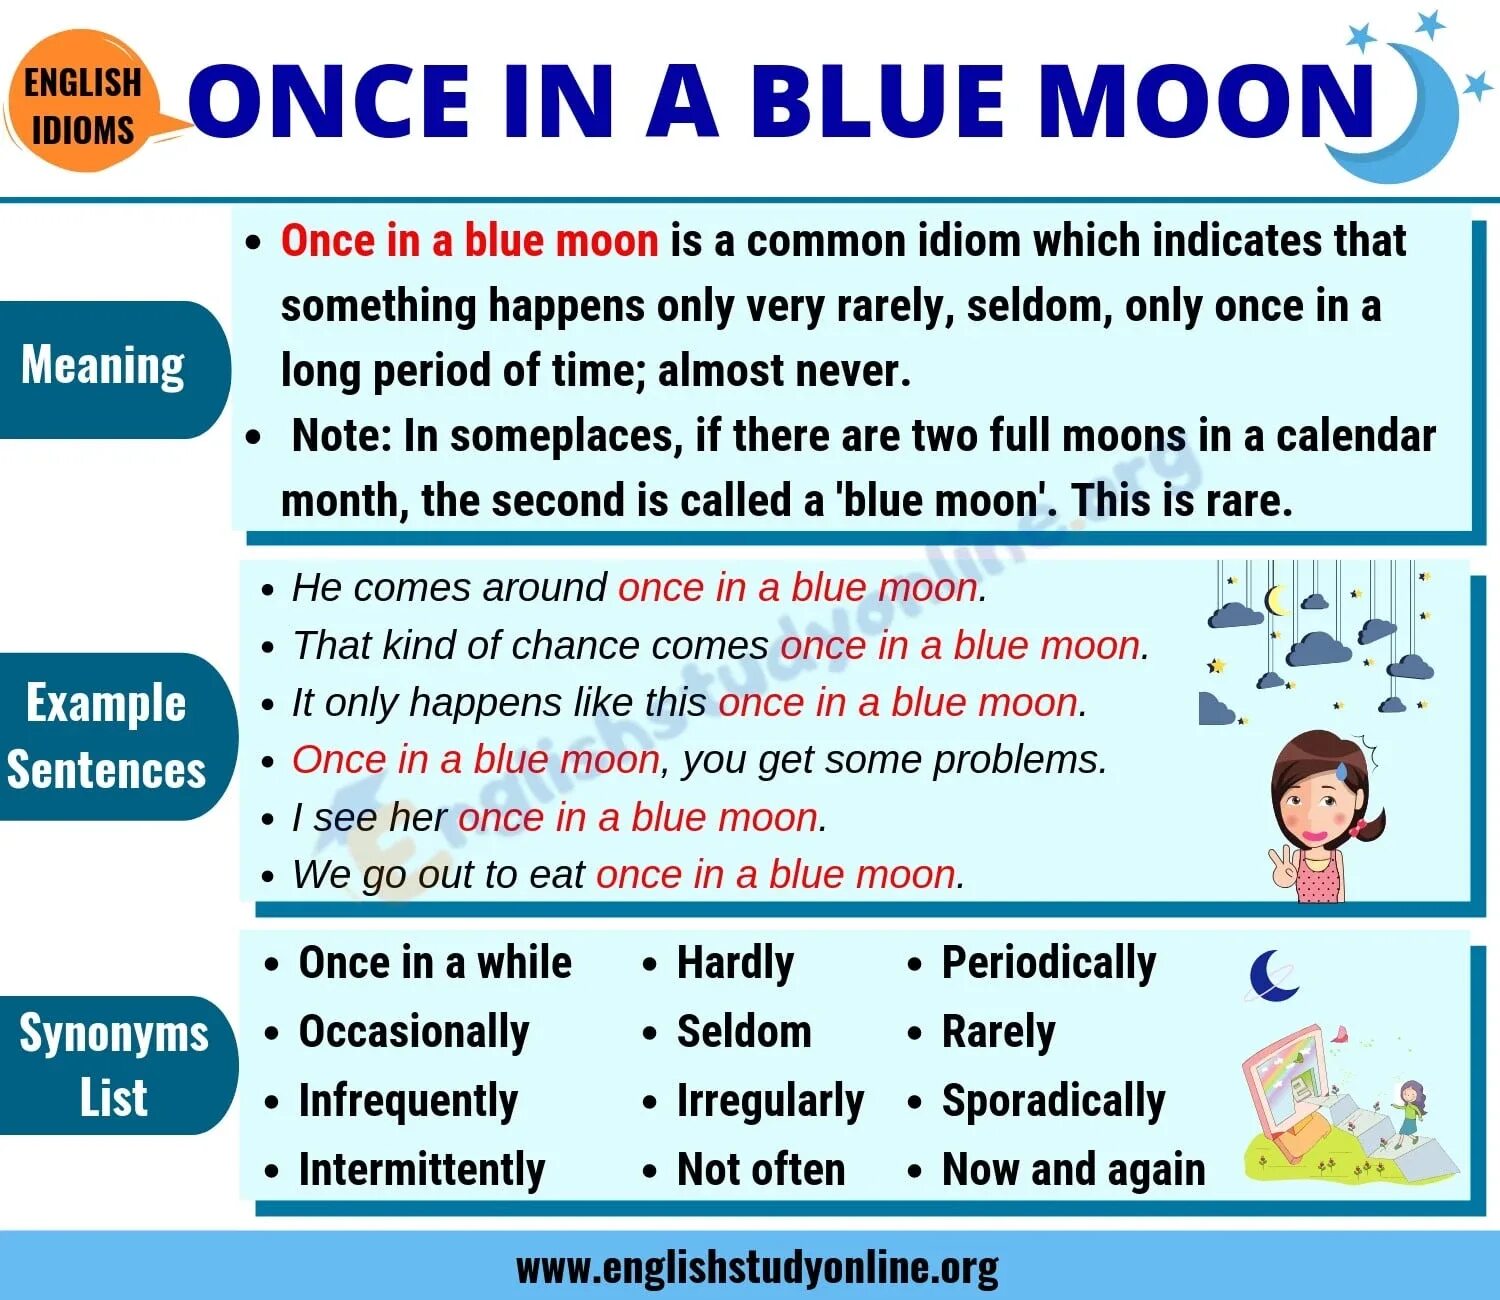 Moon idioms. Once in a Blue Moon. Once a Blue Moon идиома. Once in a Blue Moon idiom. Once in a Blue Moon meaning.